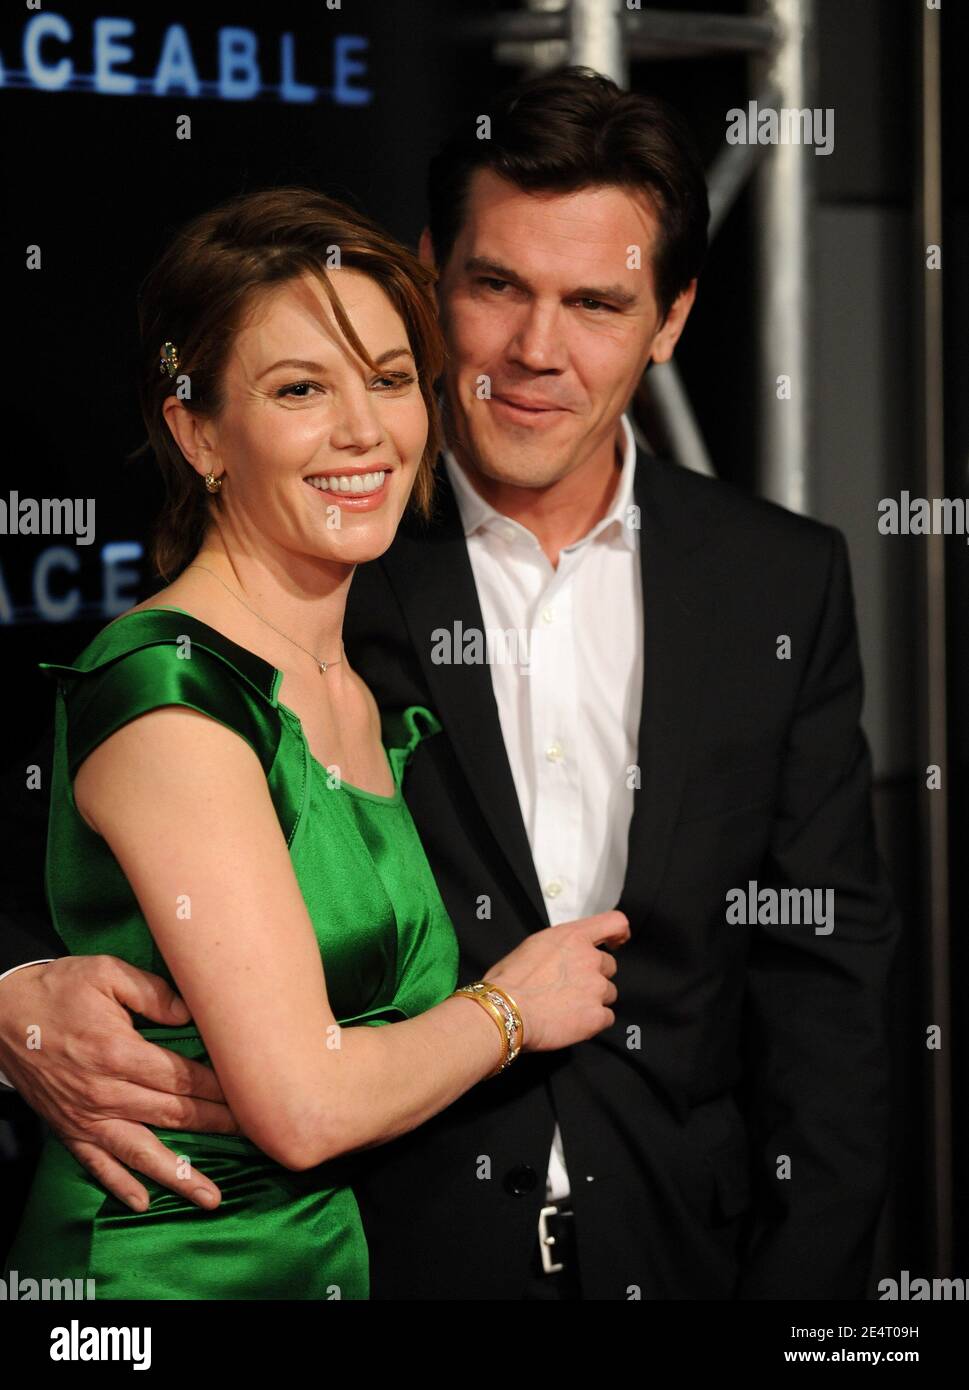 Diane Lane and Josh Brolin attend the premiere of 'Untraceable' at the Silver Screen Theatre in West Hollywood. Los Angeles, January 22, 2008. (Pictured: Diane Lane, Josh Brolin). Photo by Lionel Hahn/ABACAPRESS.COM Stock Photo